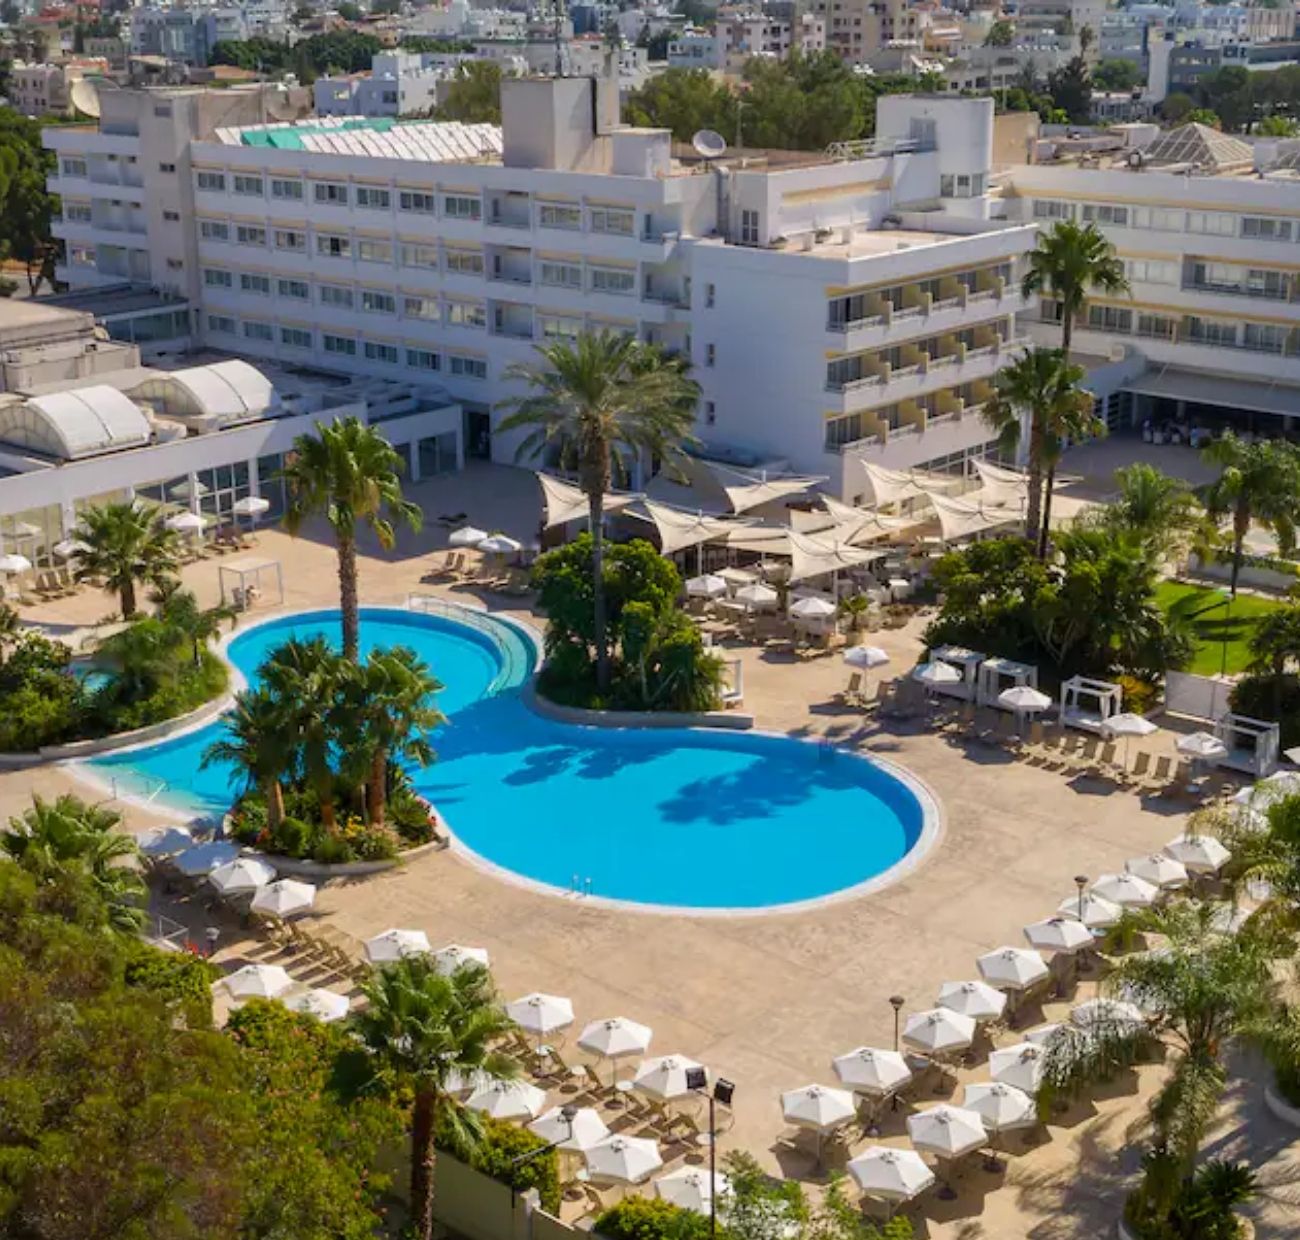 Hotels of Cyprus